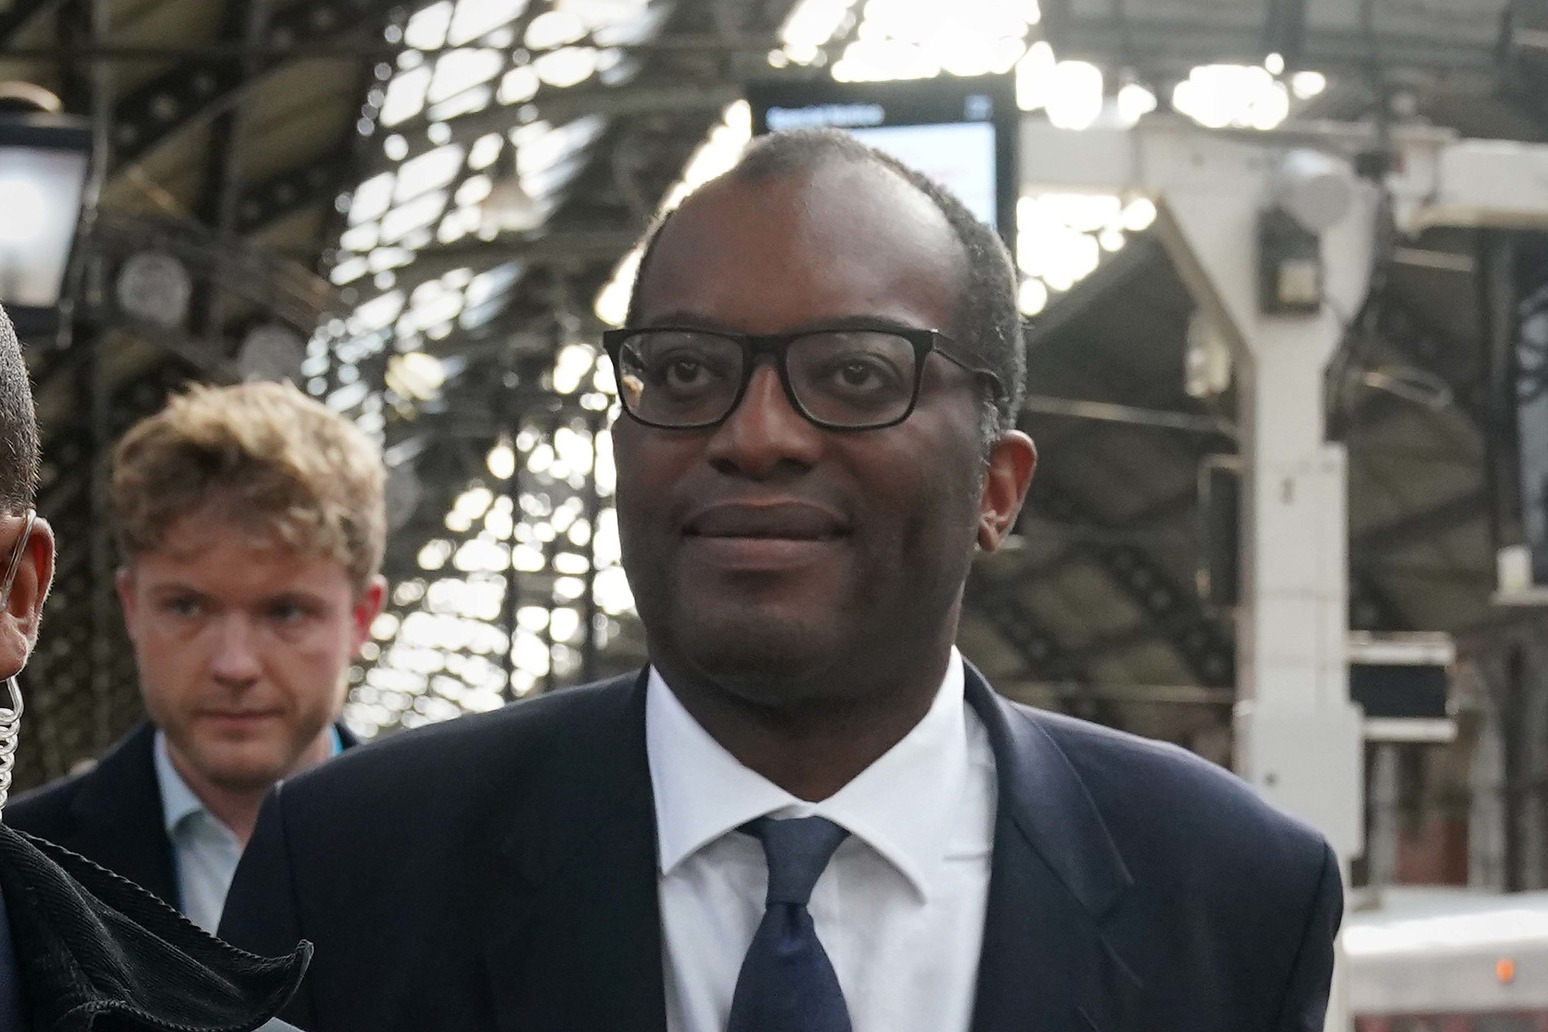 Truss and Kwarteng defend tax cuts as right plan to get economy moving